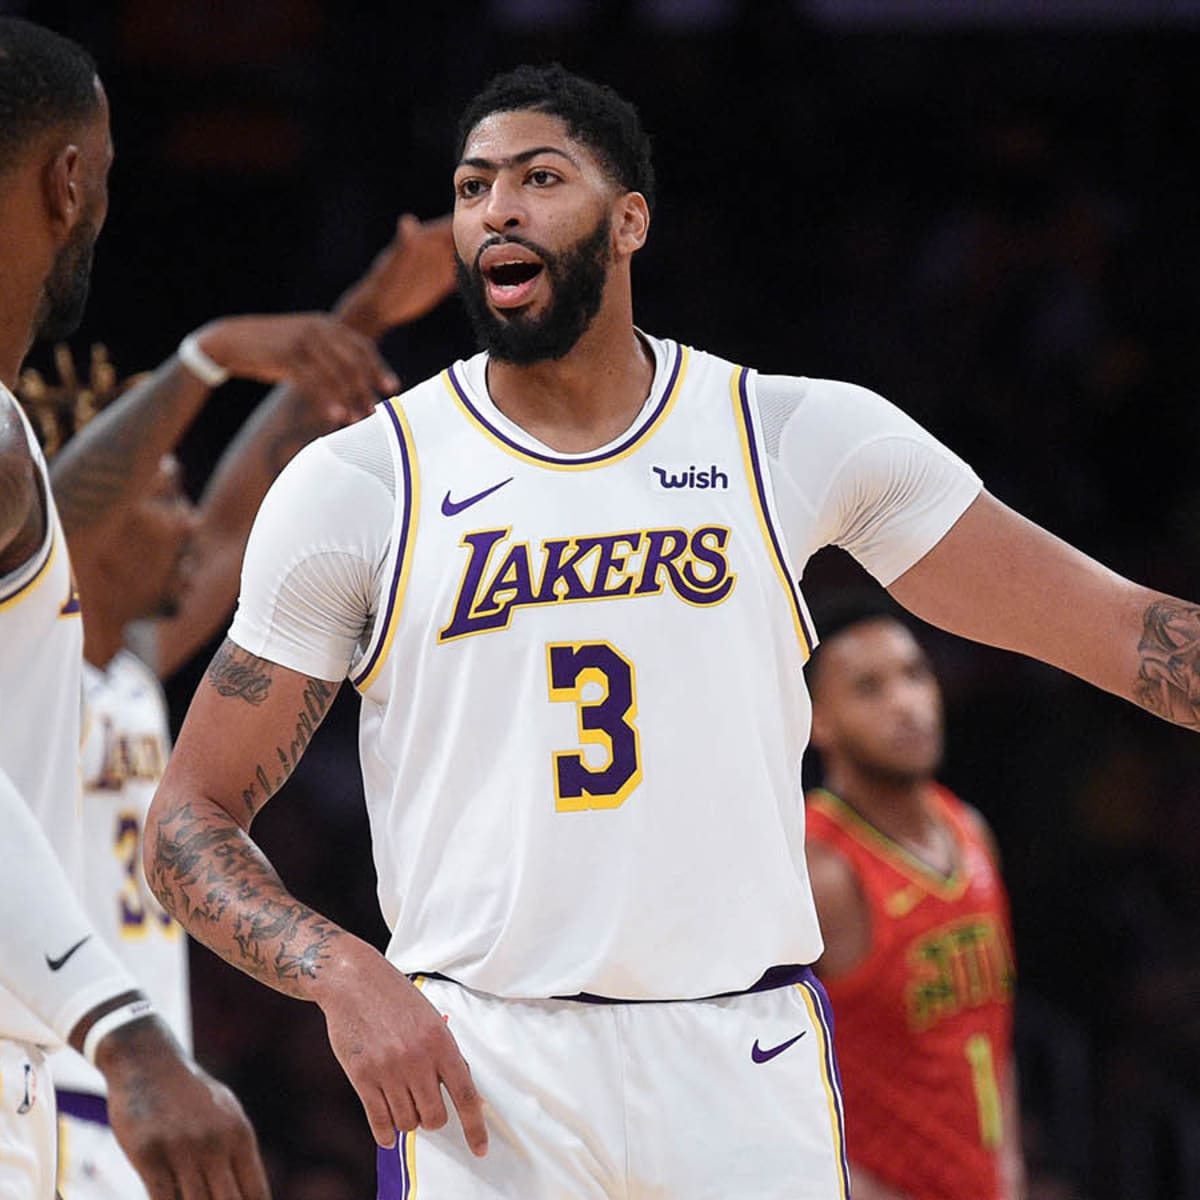 Lakers' Anthony Davis to wear own name on jersey in Orlando